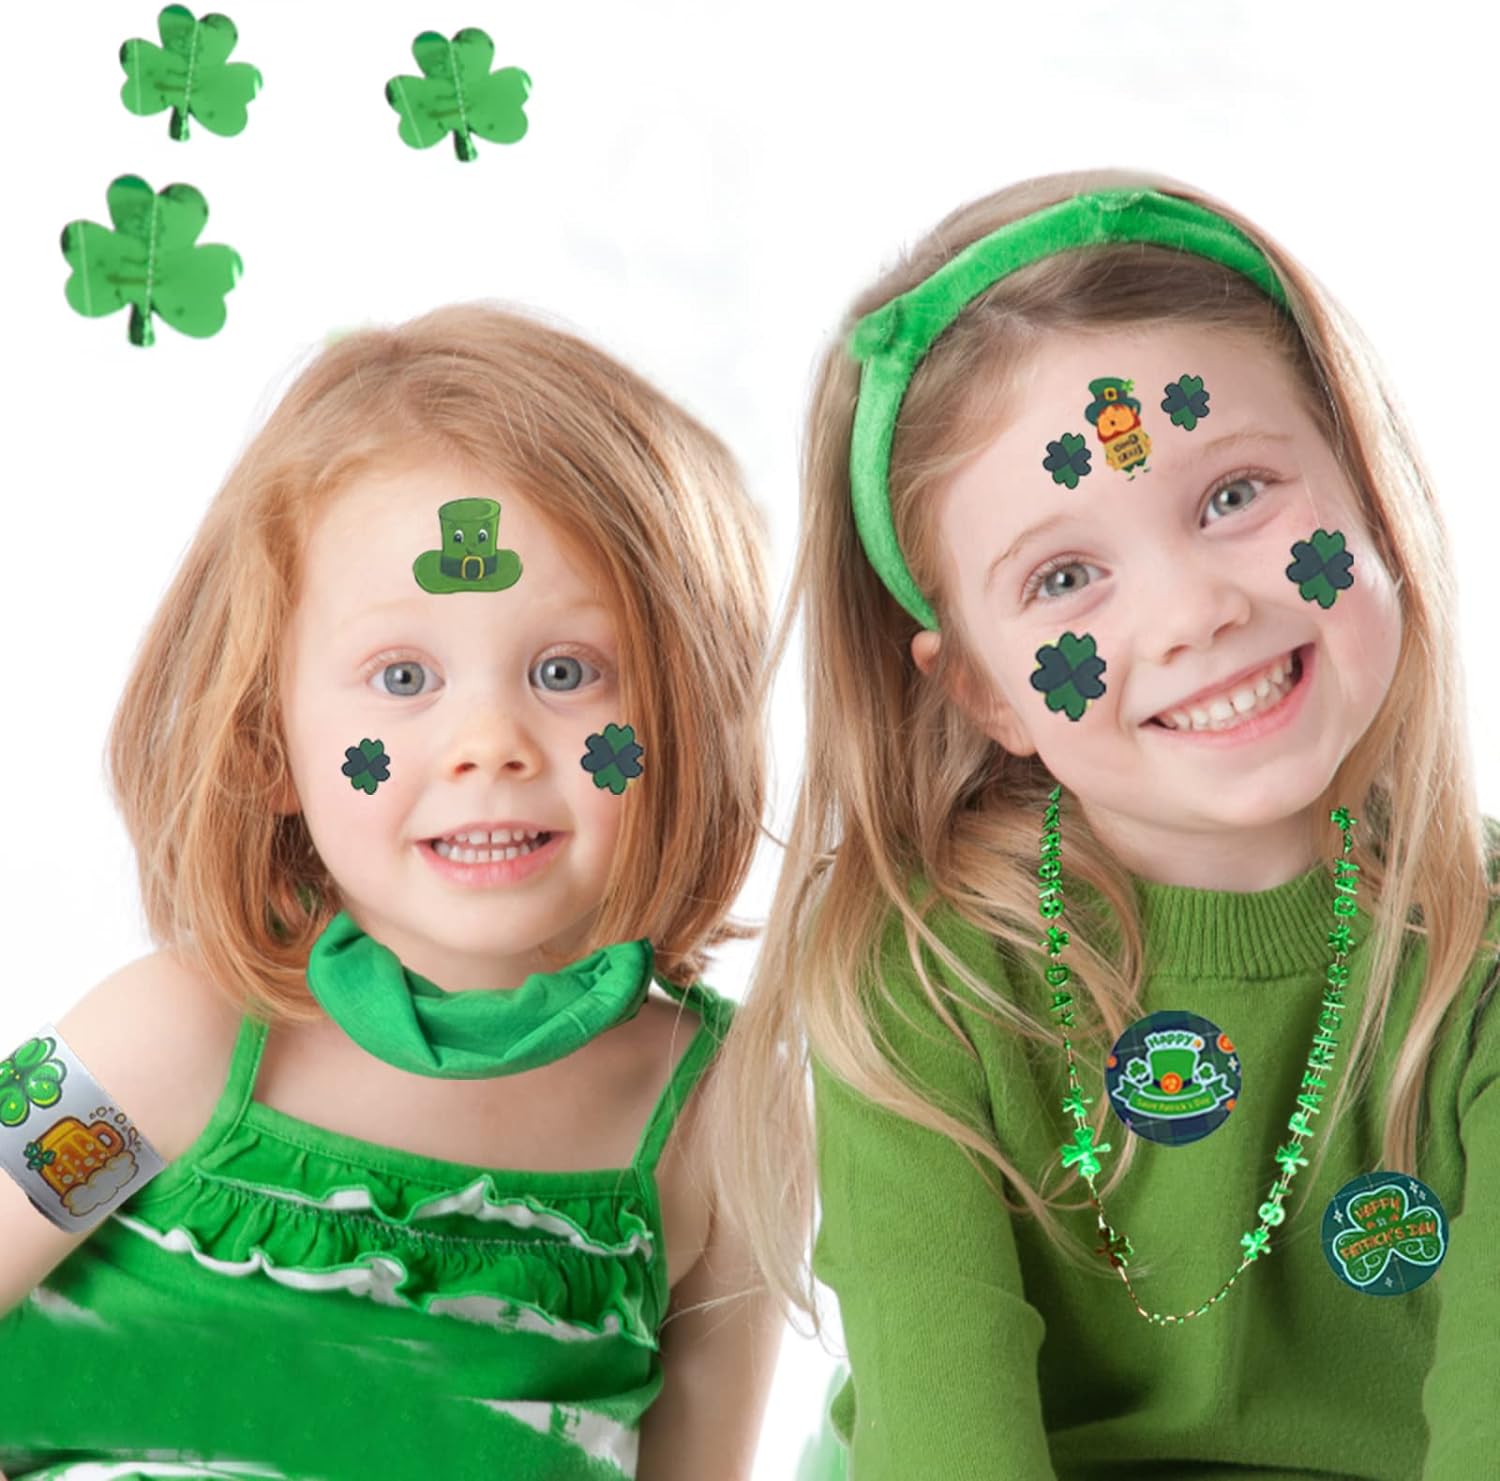 St Kids Party Favors Supplies Decorations for Irish Saint Patricks Day Decor Patricks Day Accessories Favors Set with Hat Clover Shamrock Glasses and Necklaces Lucky Bracelets Tattoo Stickers 